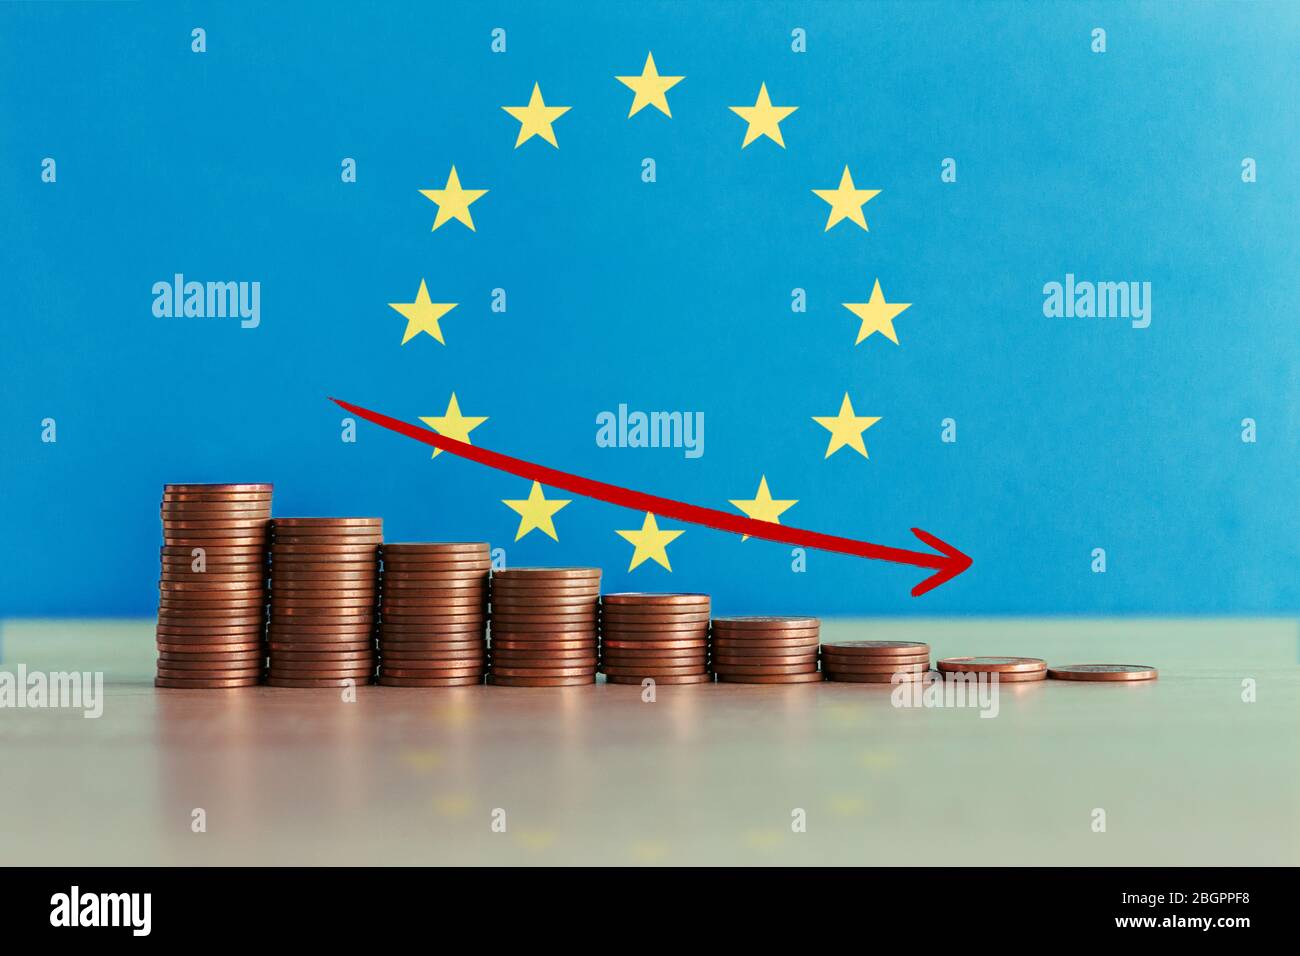 Stock photo of economic crisis and recession concept in Europe with descending ladder of coins and flag in background Stock Photo